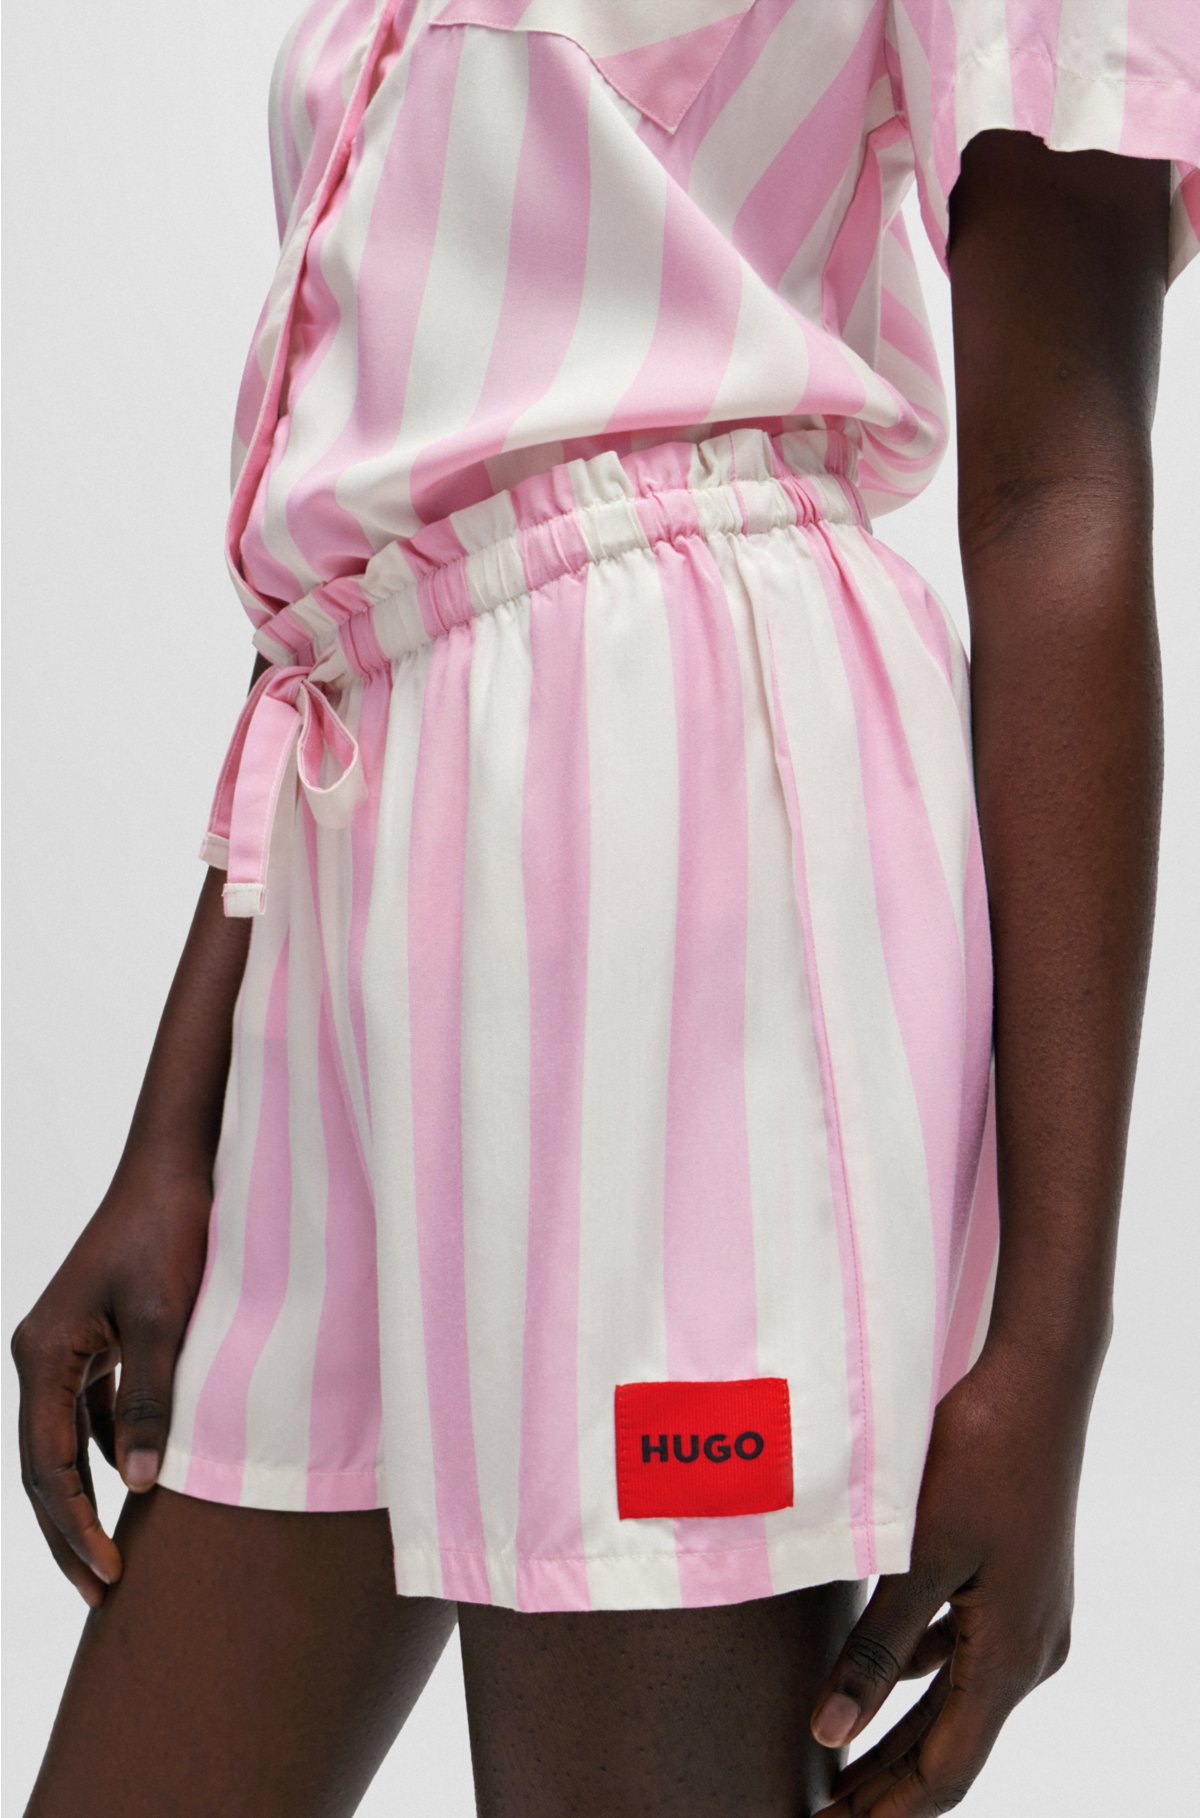 Patterned pyjama shorts with red logo label, Pink